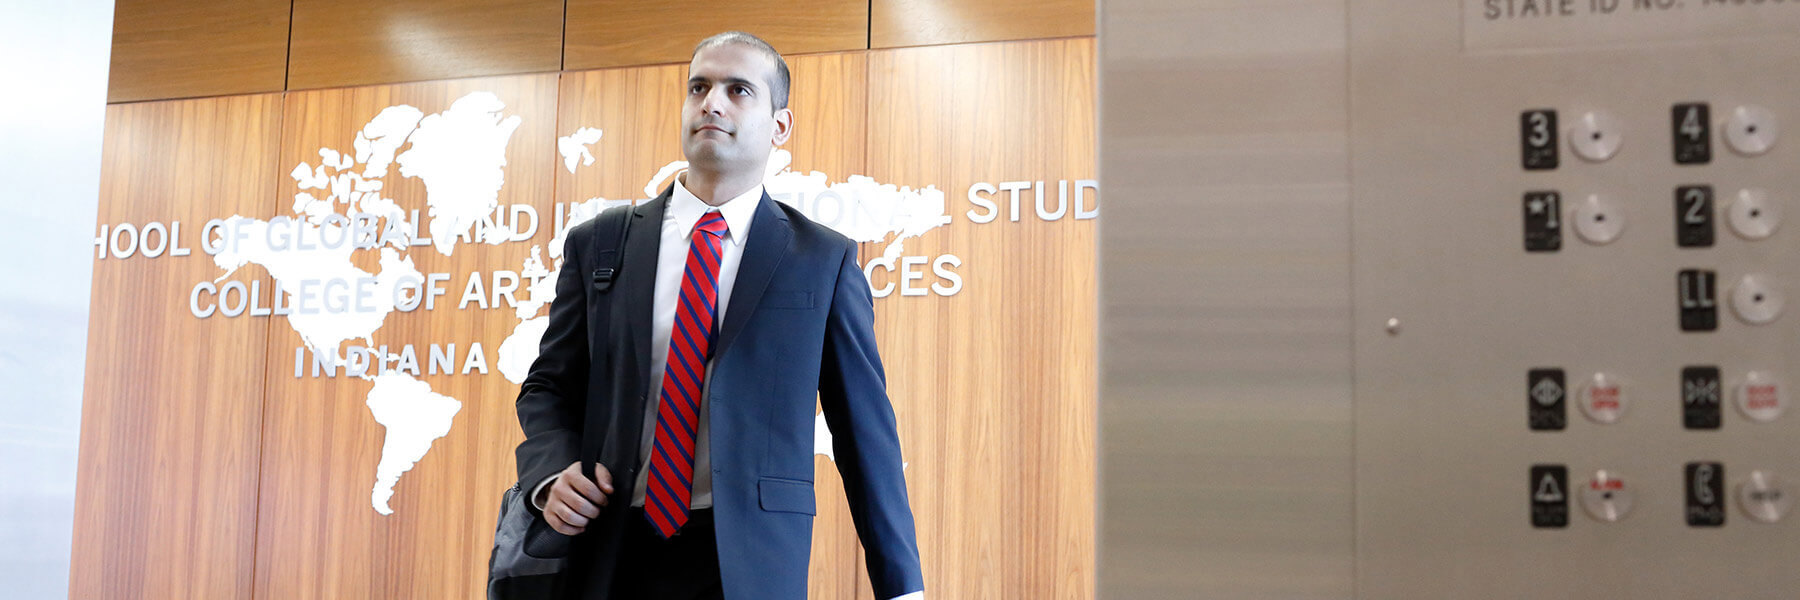 A student dressed in a suit standing in front of an elevator